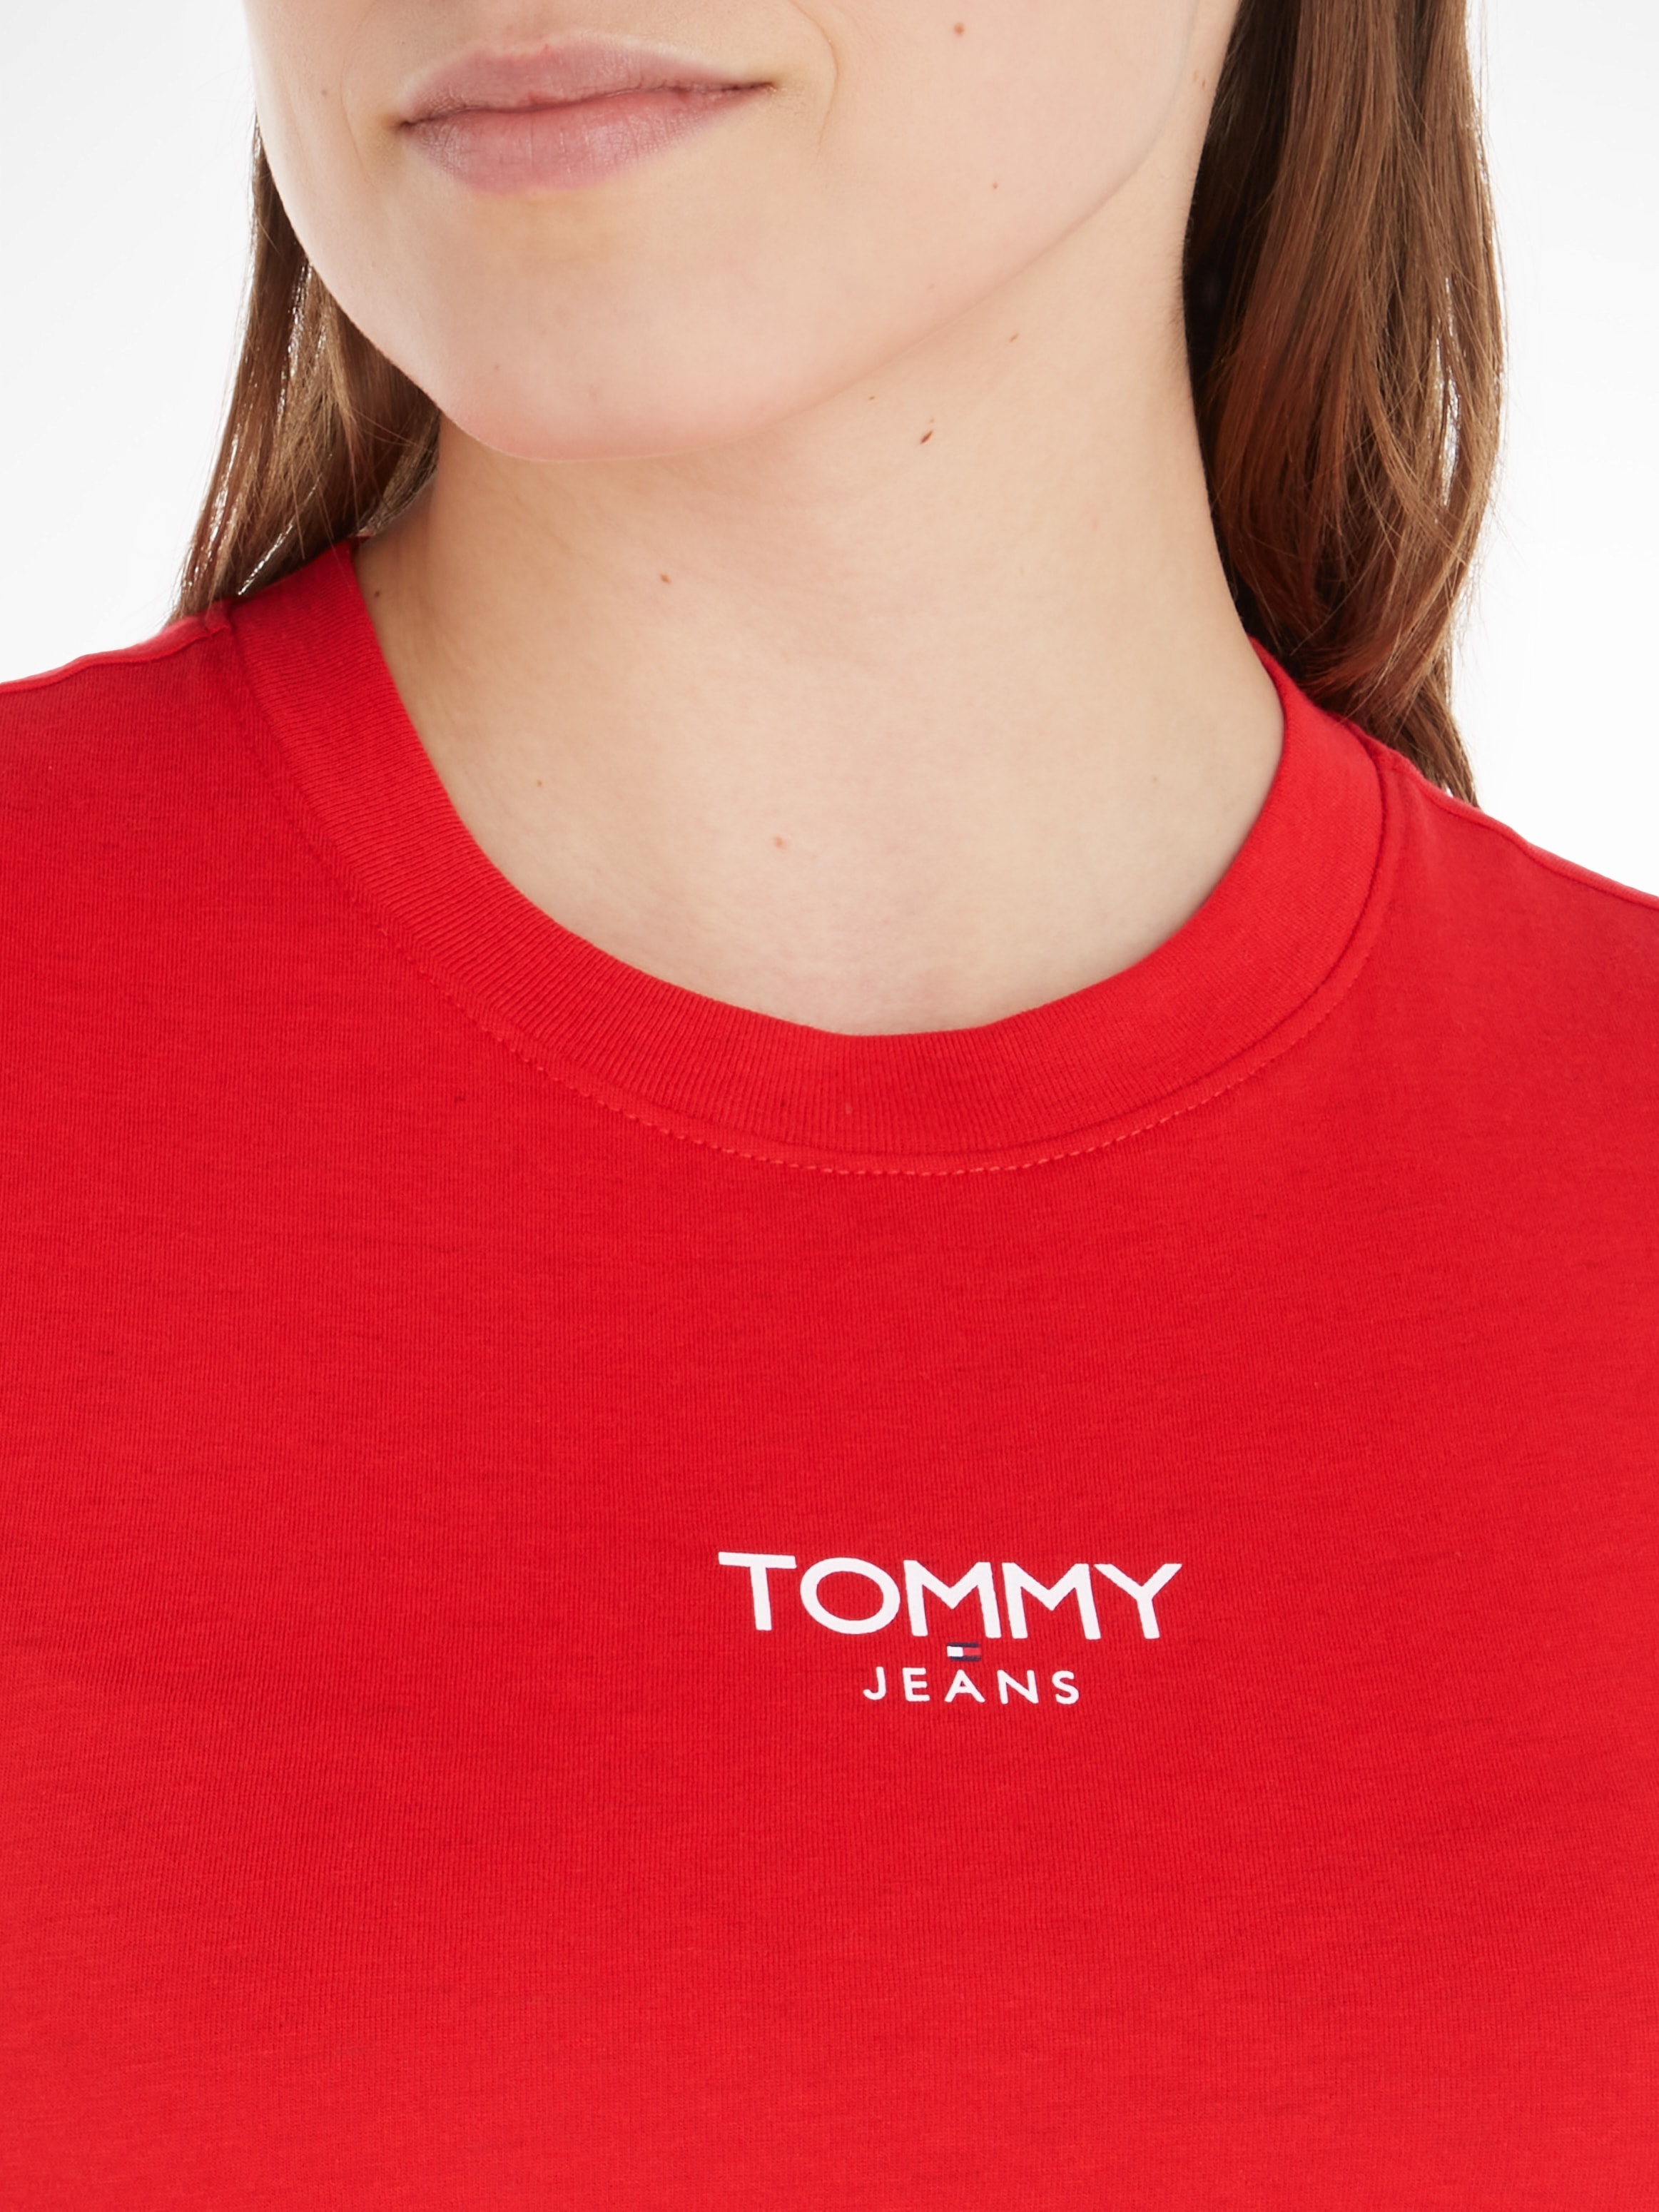 online ESSENTIAL SS«, »TJW 1 mit Tommy T-Shirt I\'m LOGO Jeans Logo Jeans Tommy walking BBY |